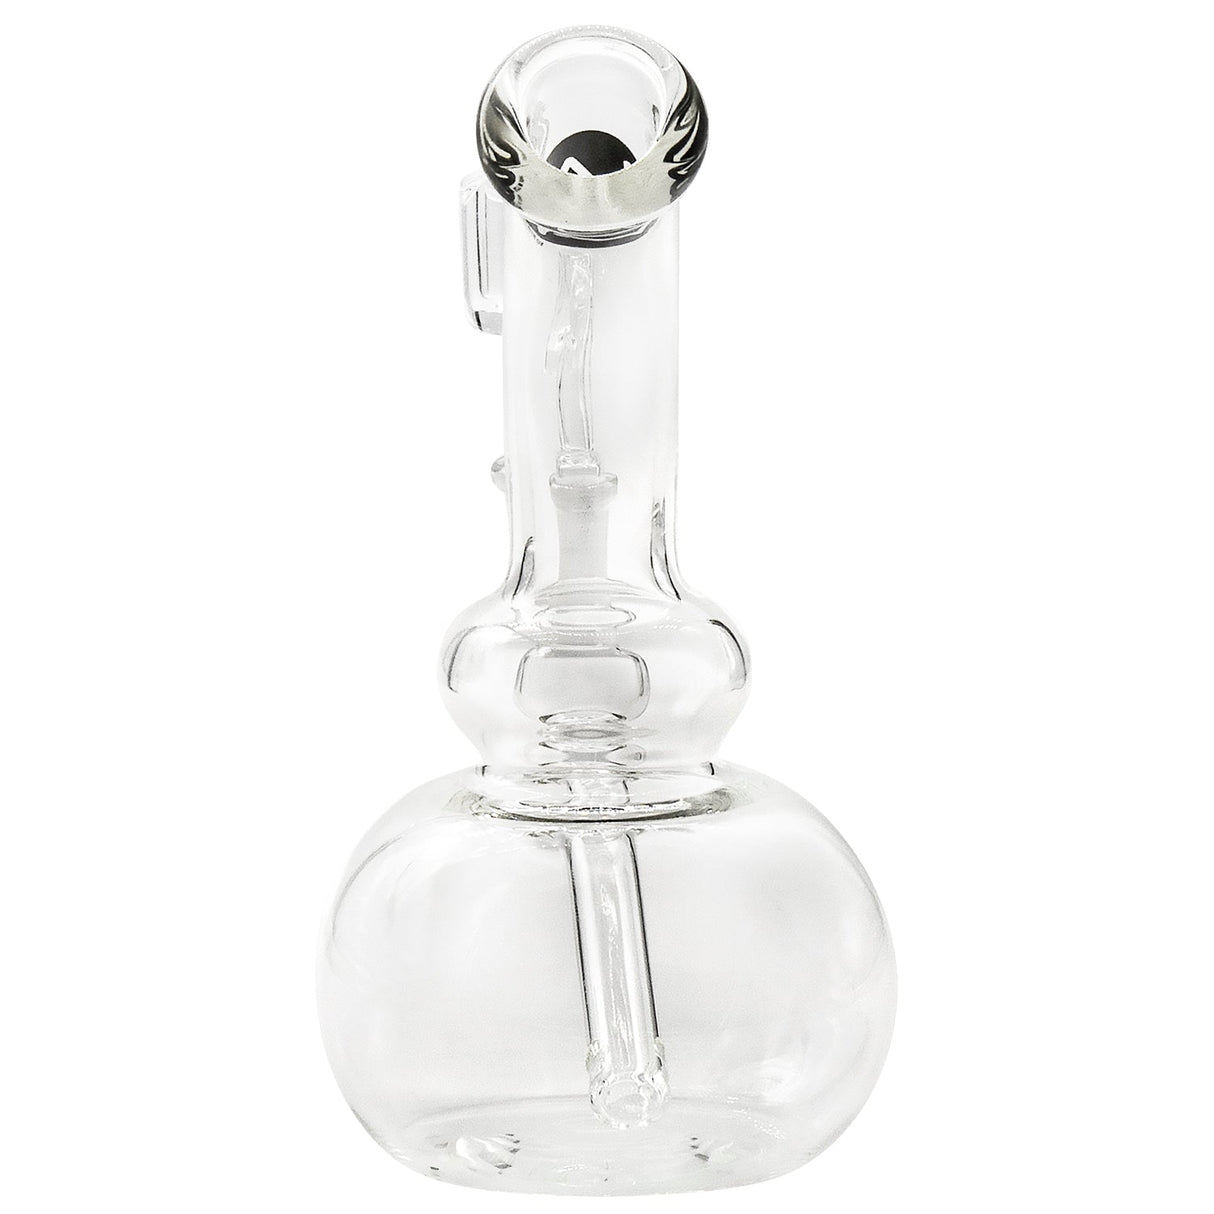 LA Pipes Bubble Concentrate Waterpipe front view, 6" banger hanger design, for dry herbs and concentrates